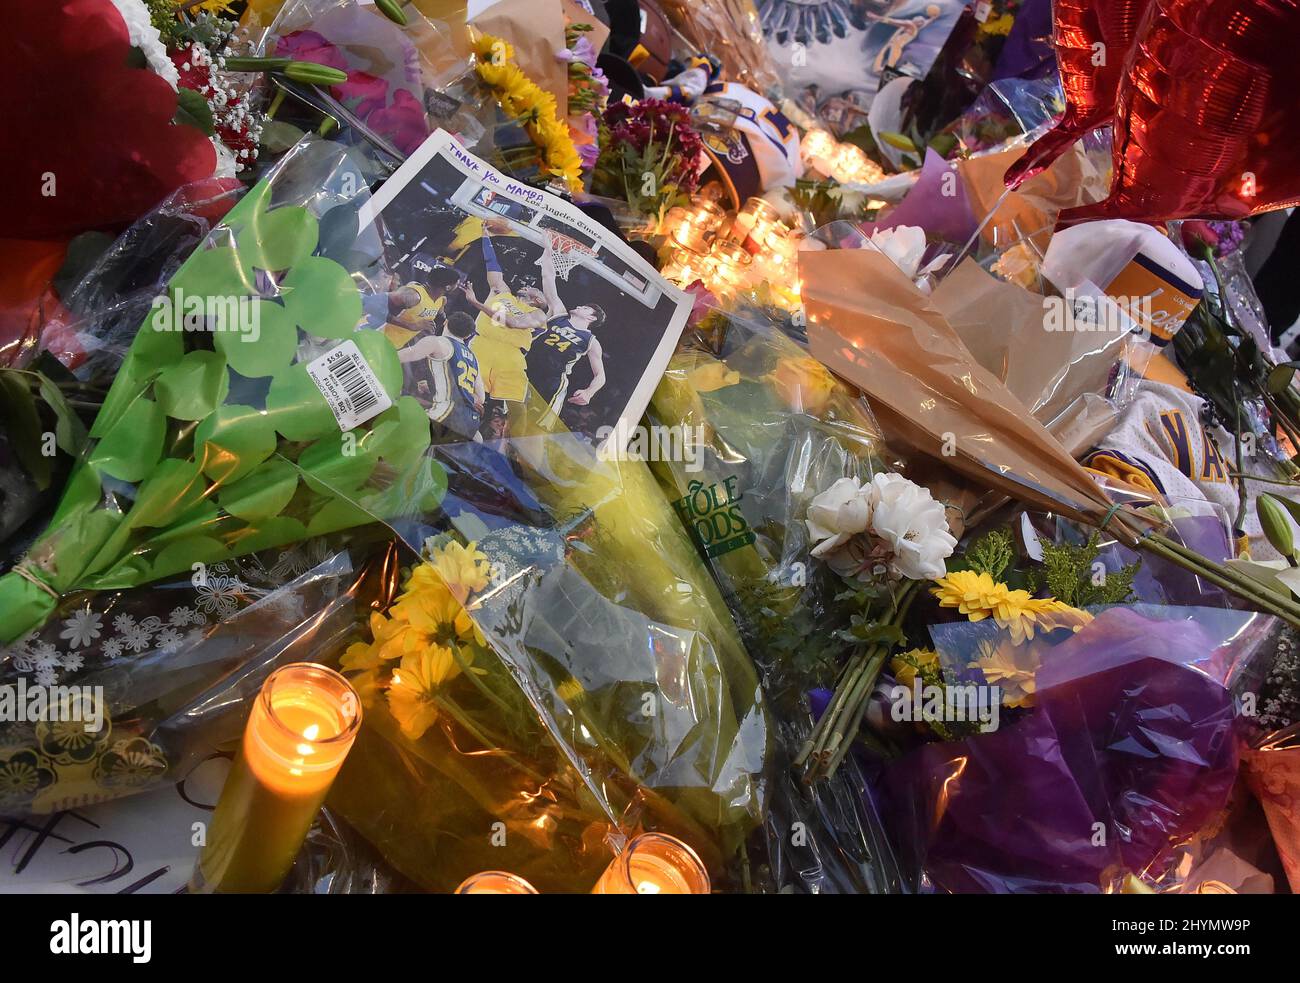 Memorial for Kobe Bryant in front of Staples Center on January 26, 2020 in Los Angeles, CA. Stock Photo